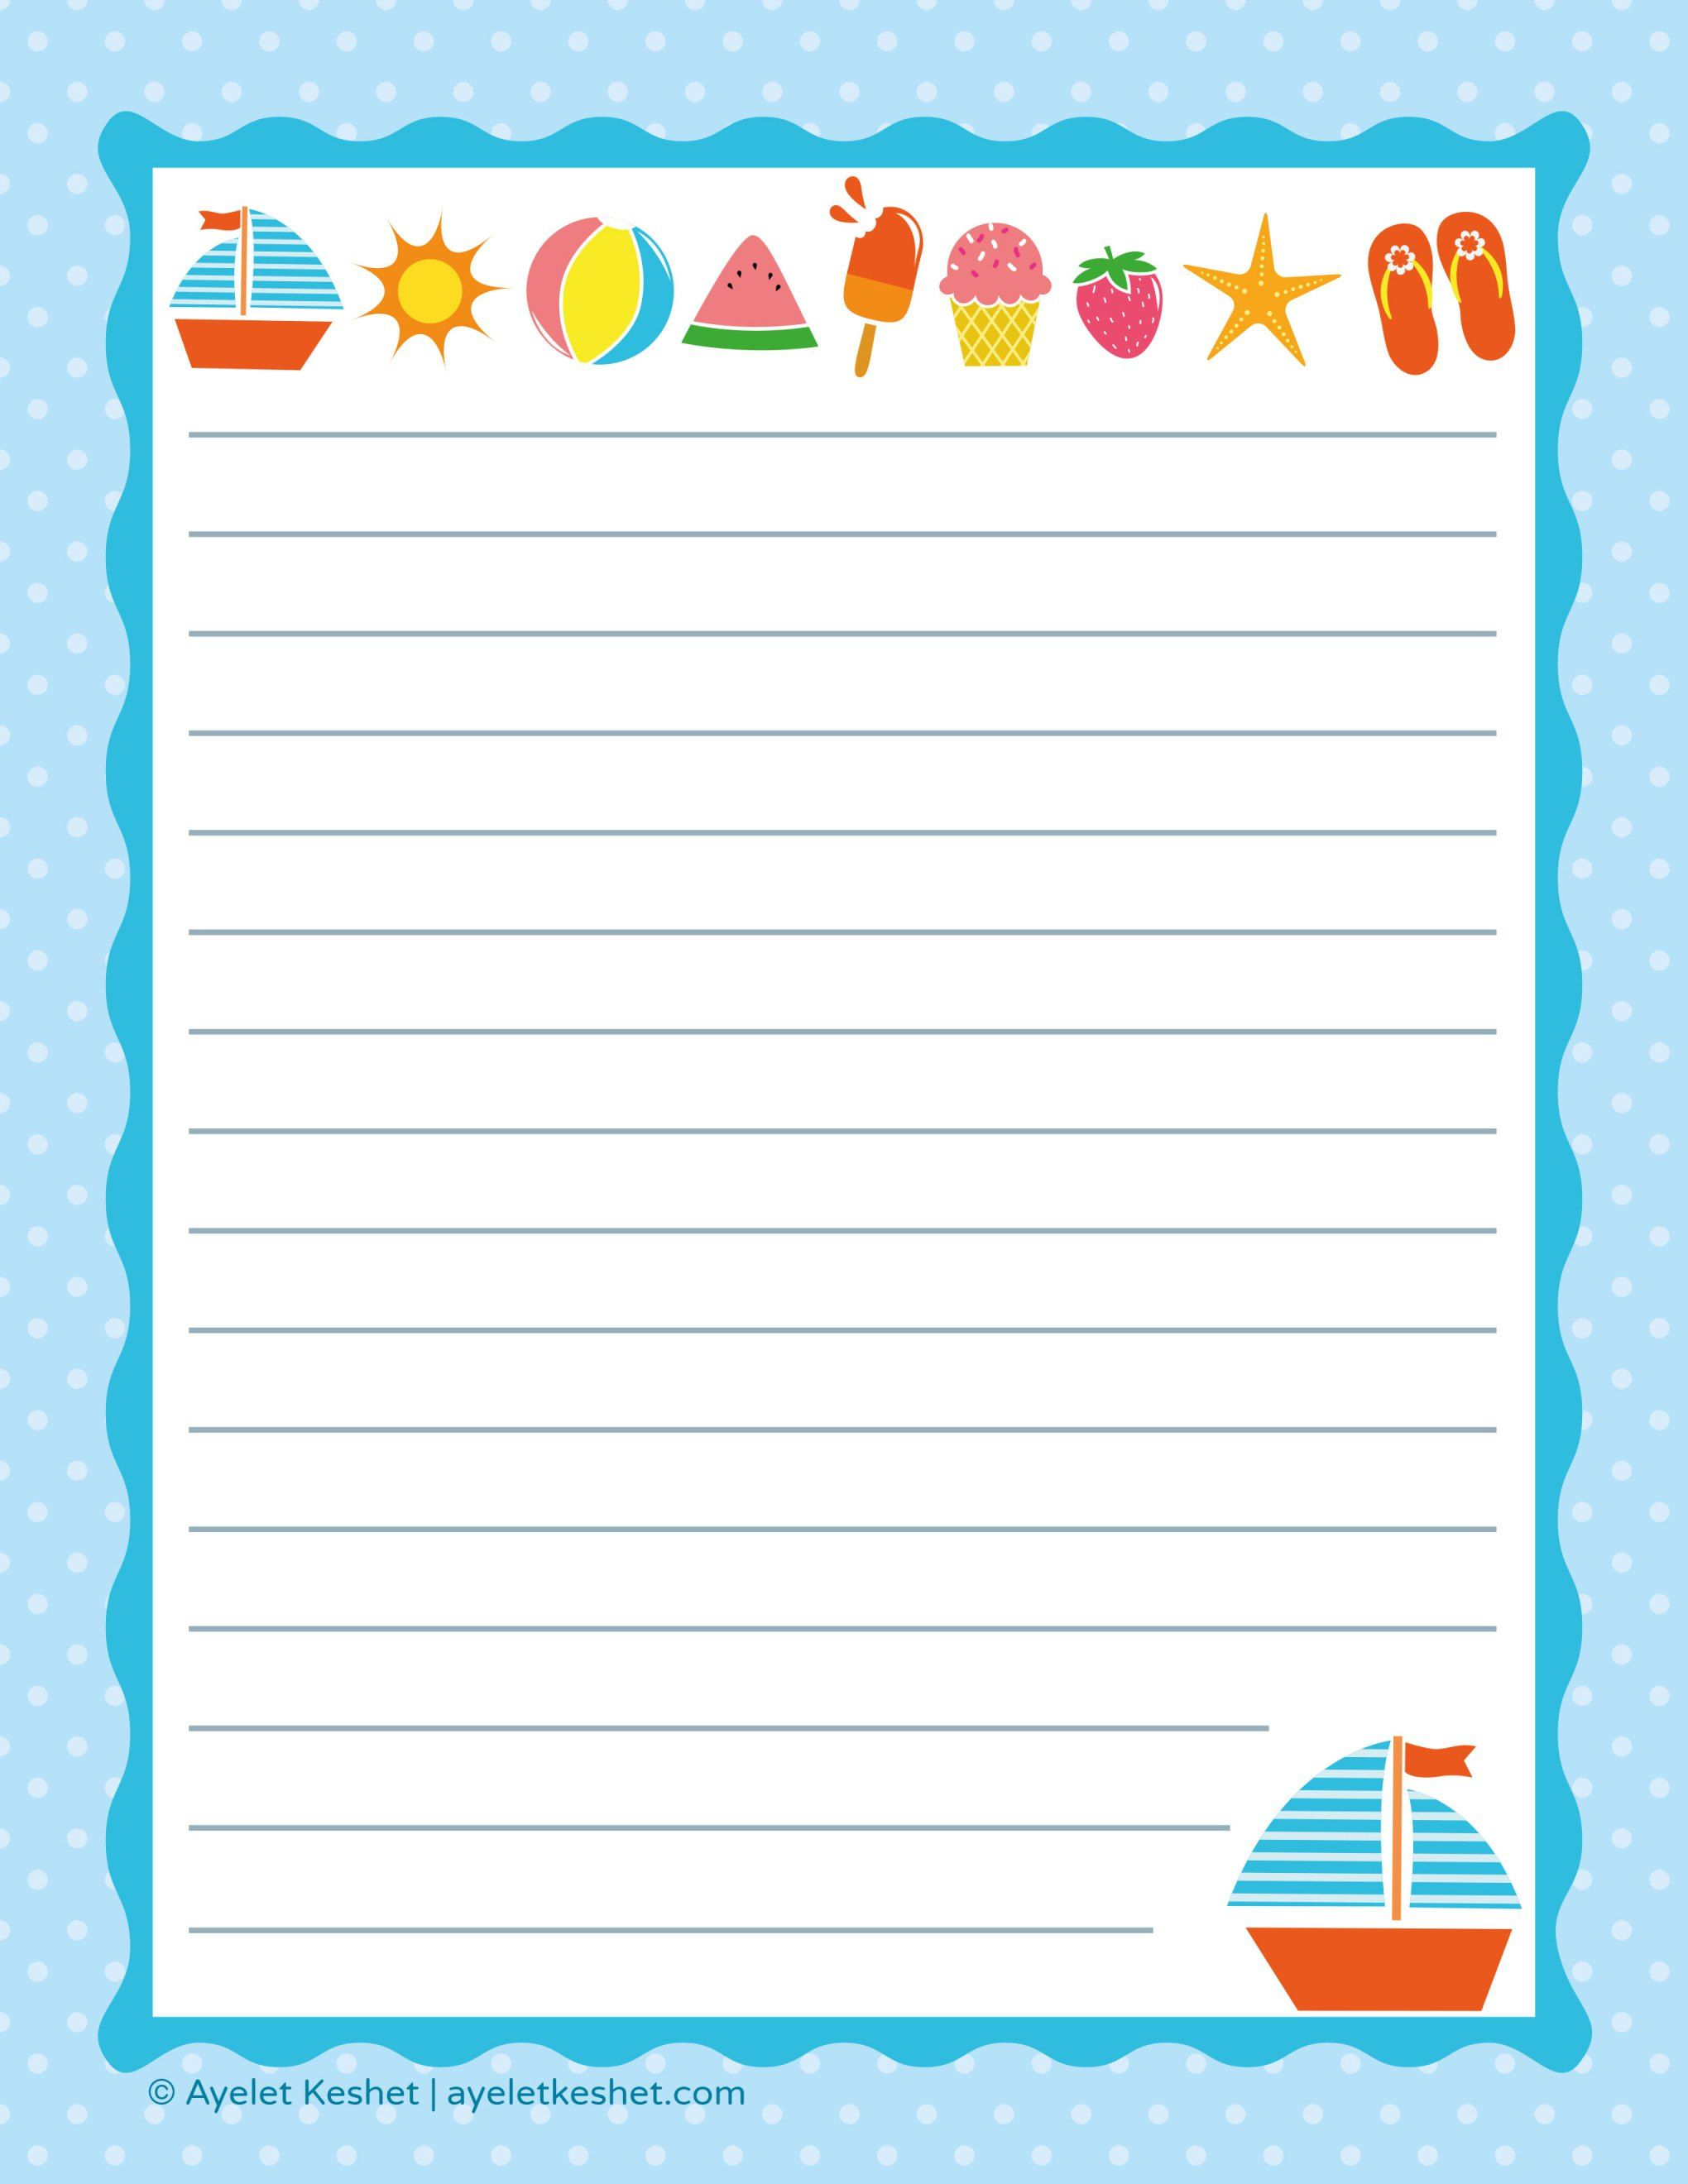 Free Printable Letter Paper | Printables To Go | Printable Letters - Free Printable Writing Paper For Adults